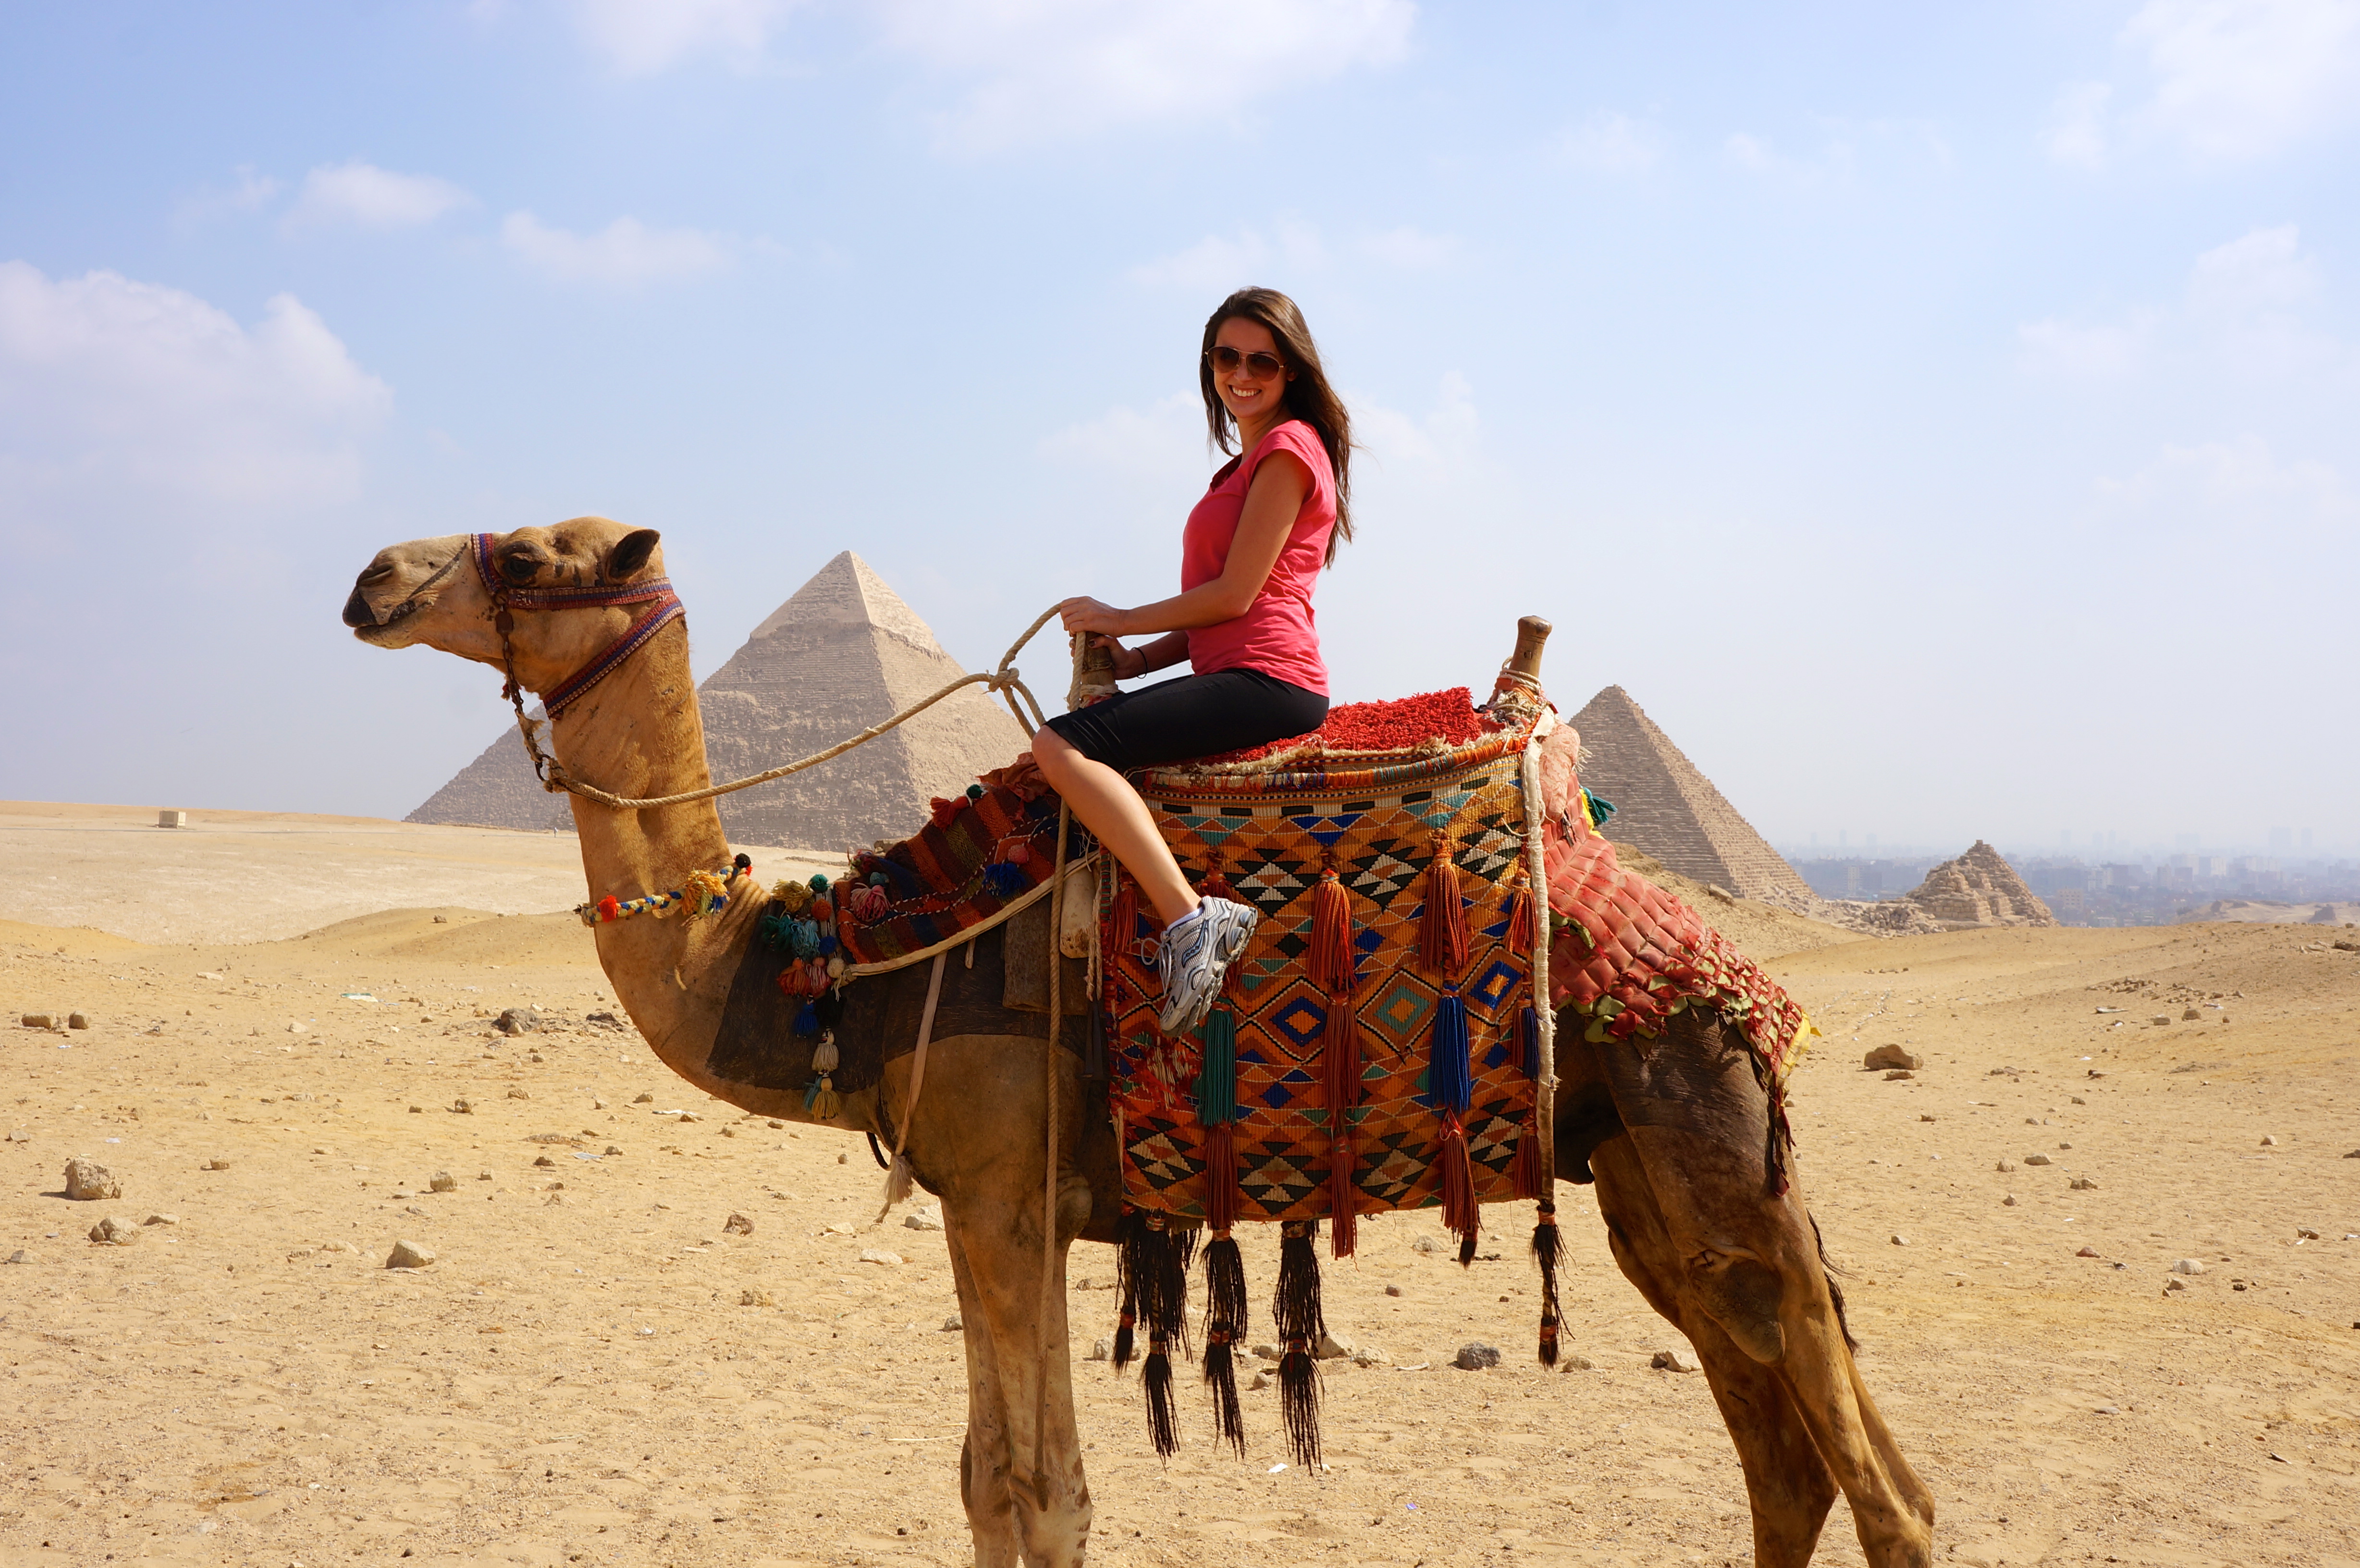 Ride a Camel or Horse in the Desert of Giza Pyramids | Egypt Tours ...